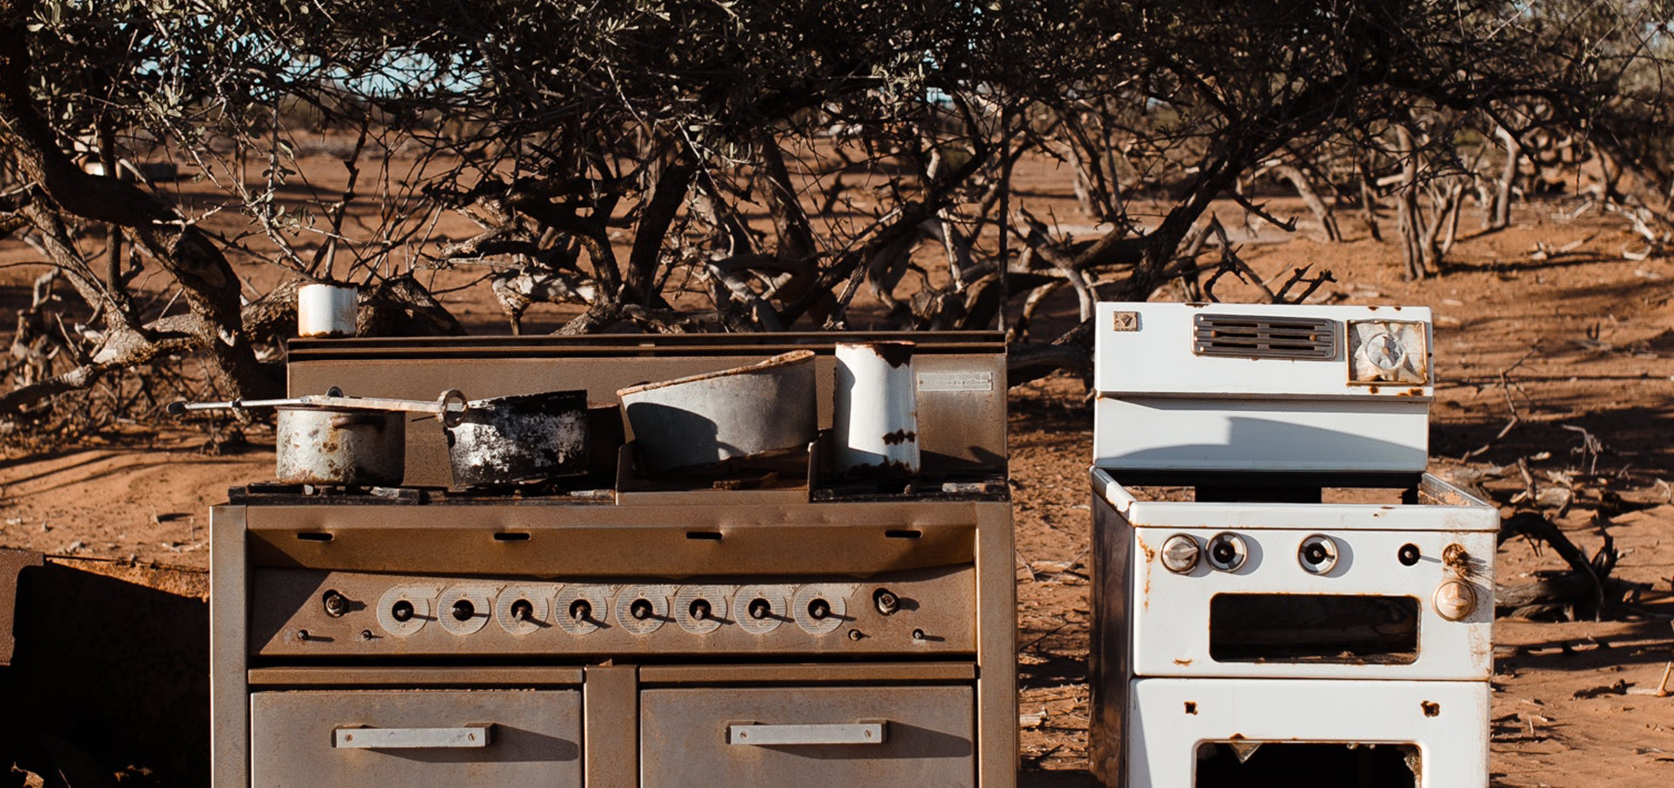 Old gas stove in desert stock image